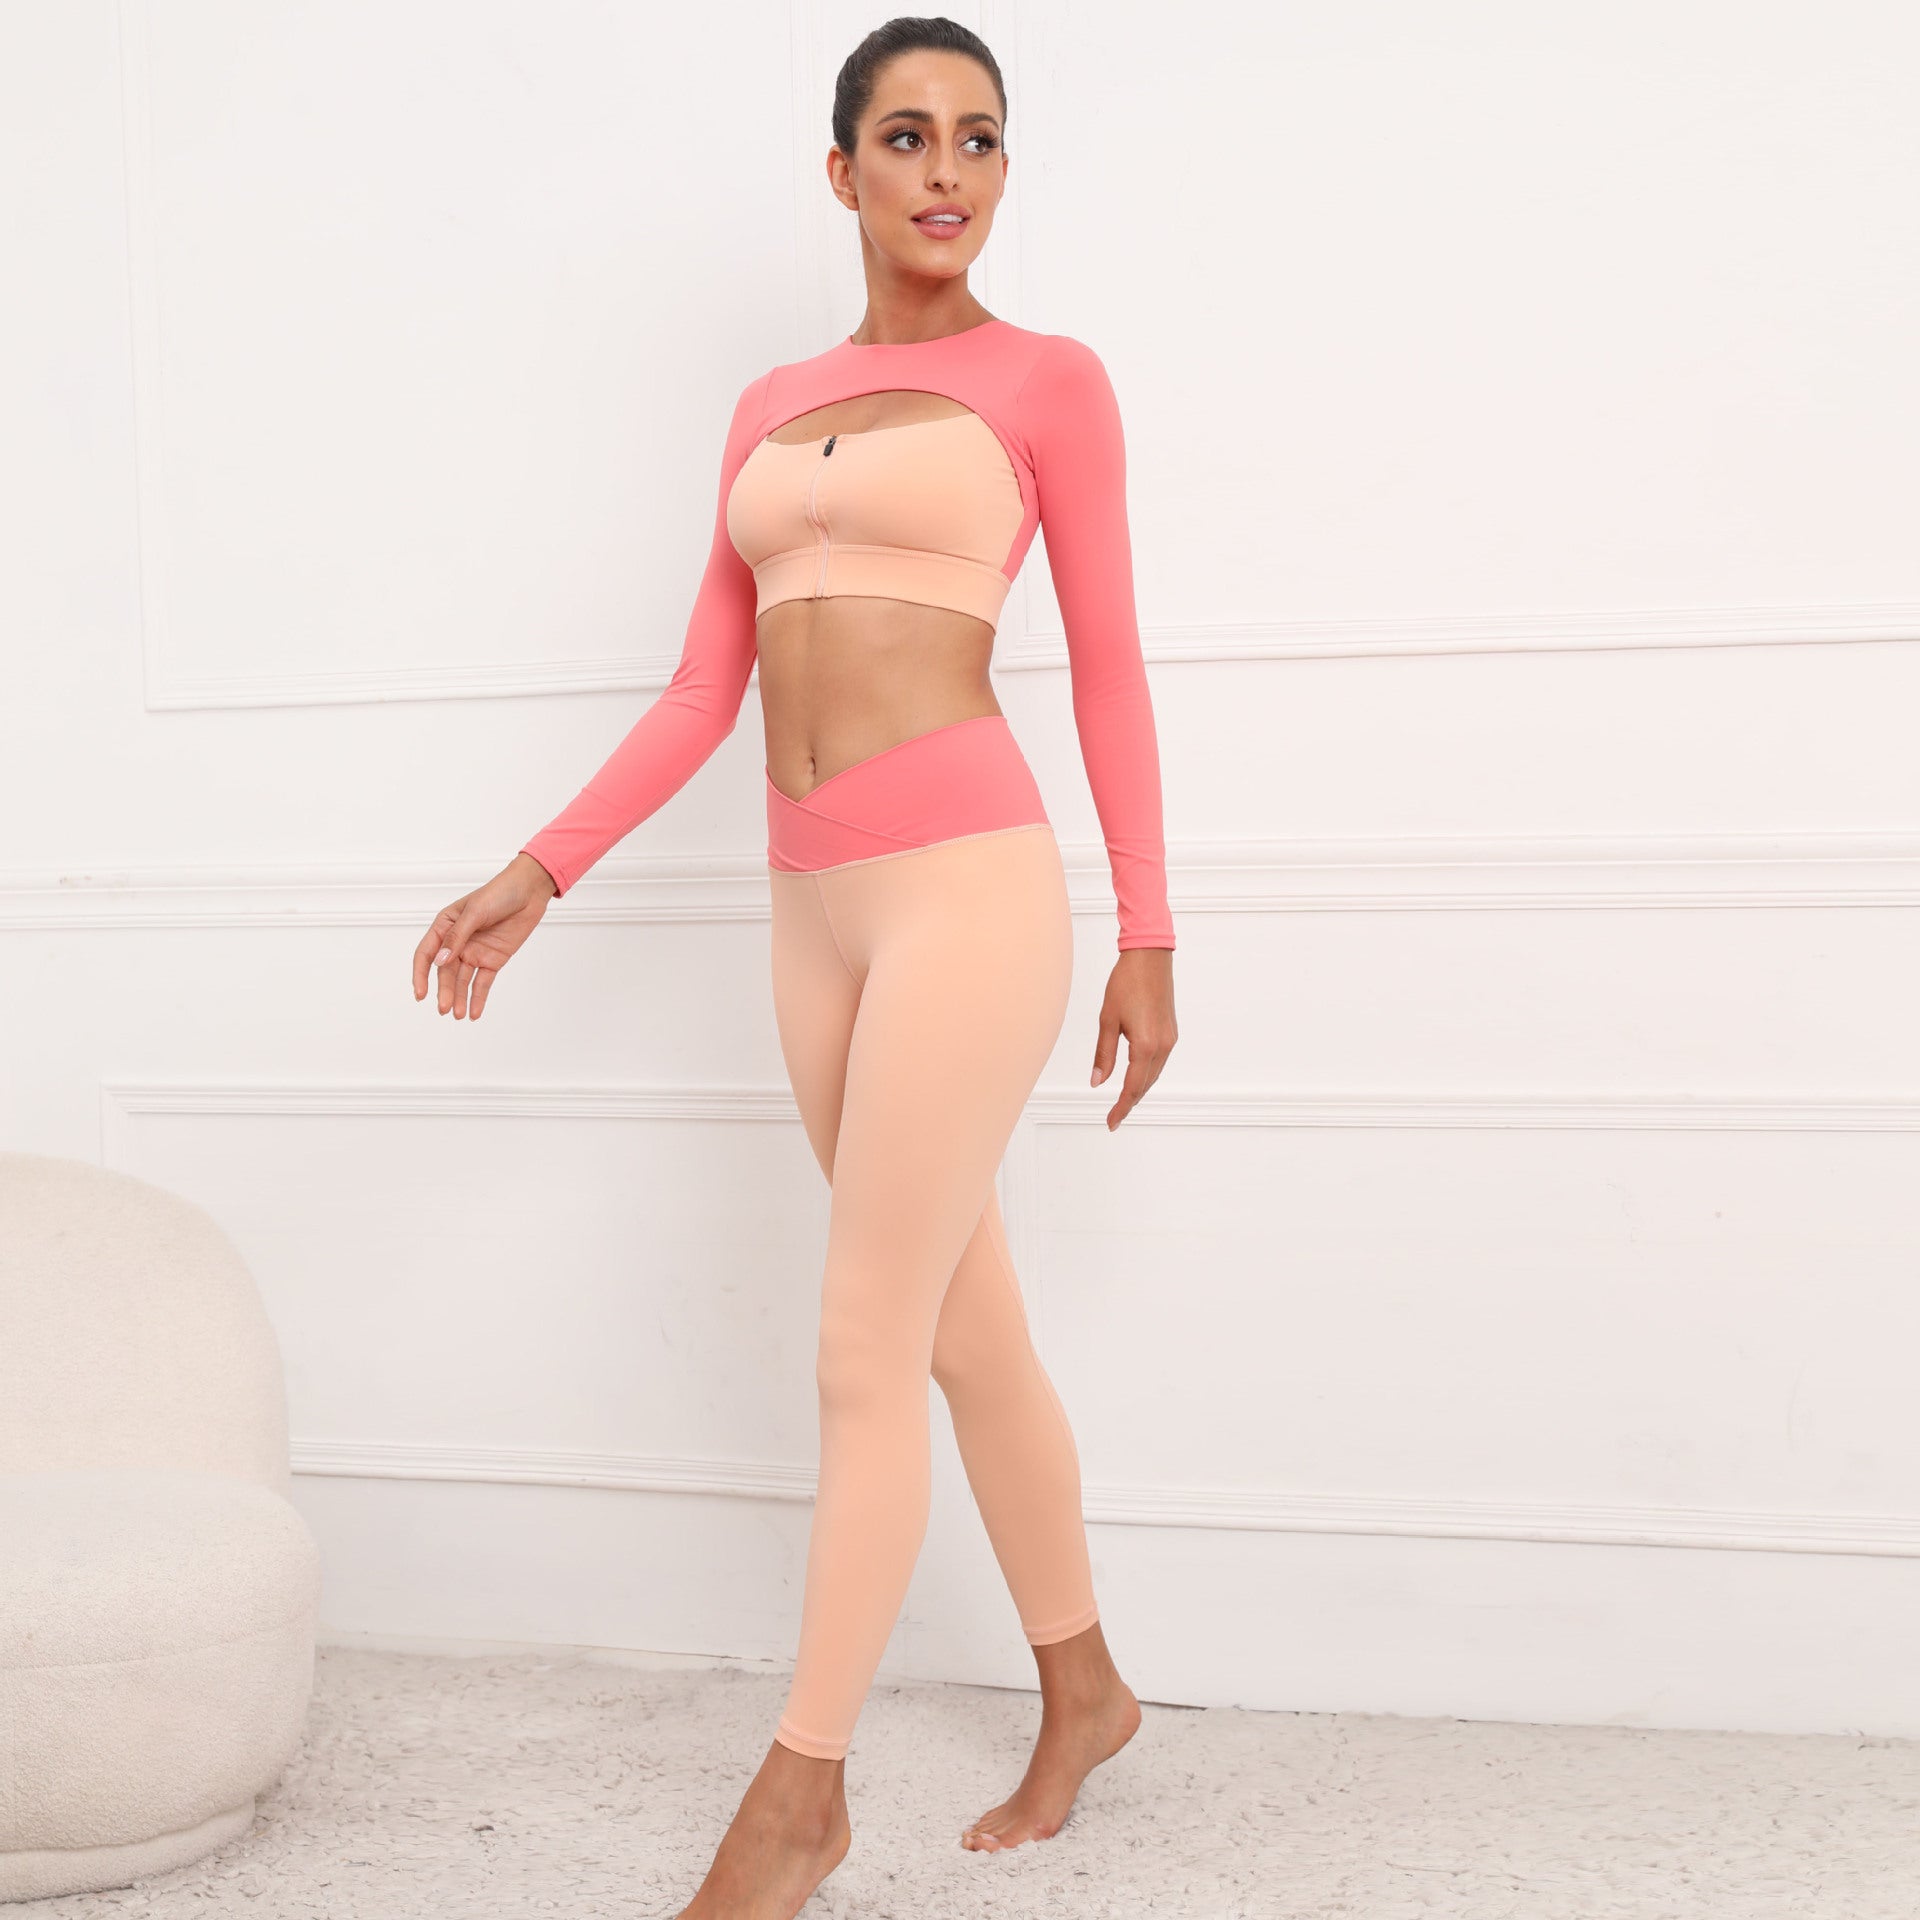 Long Sleeves Two Pieces Running Suits for Women-Activewear-Green-S-Free Shipping Leatheretro